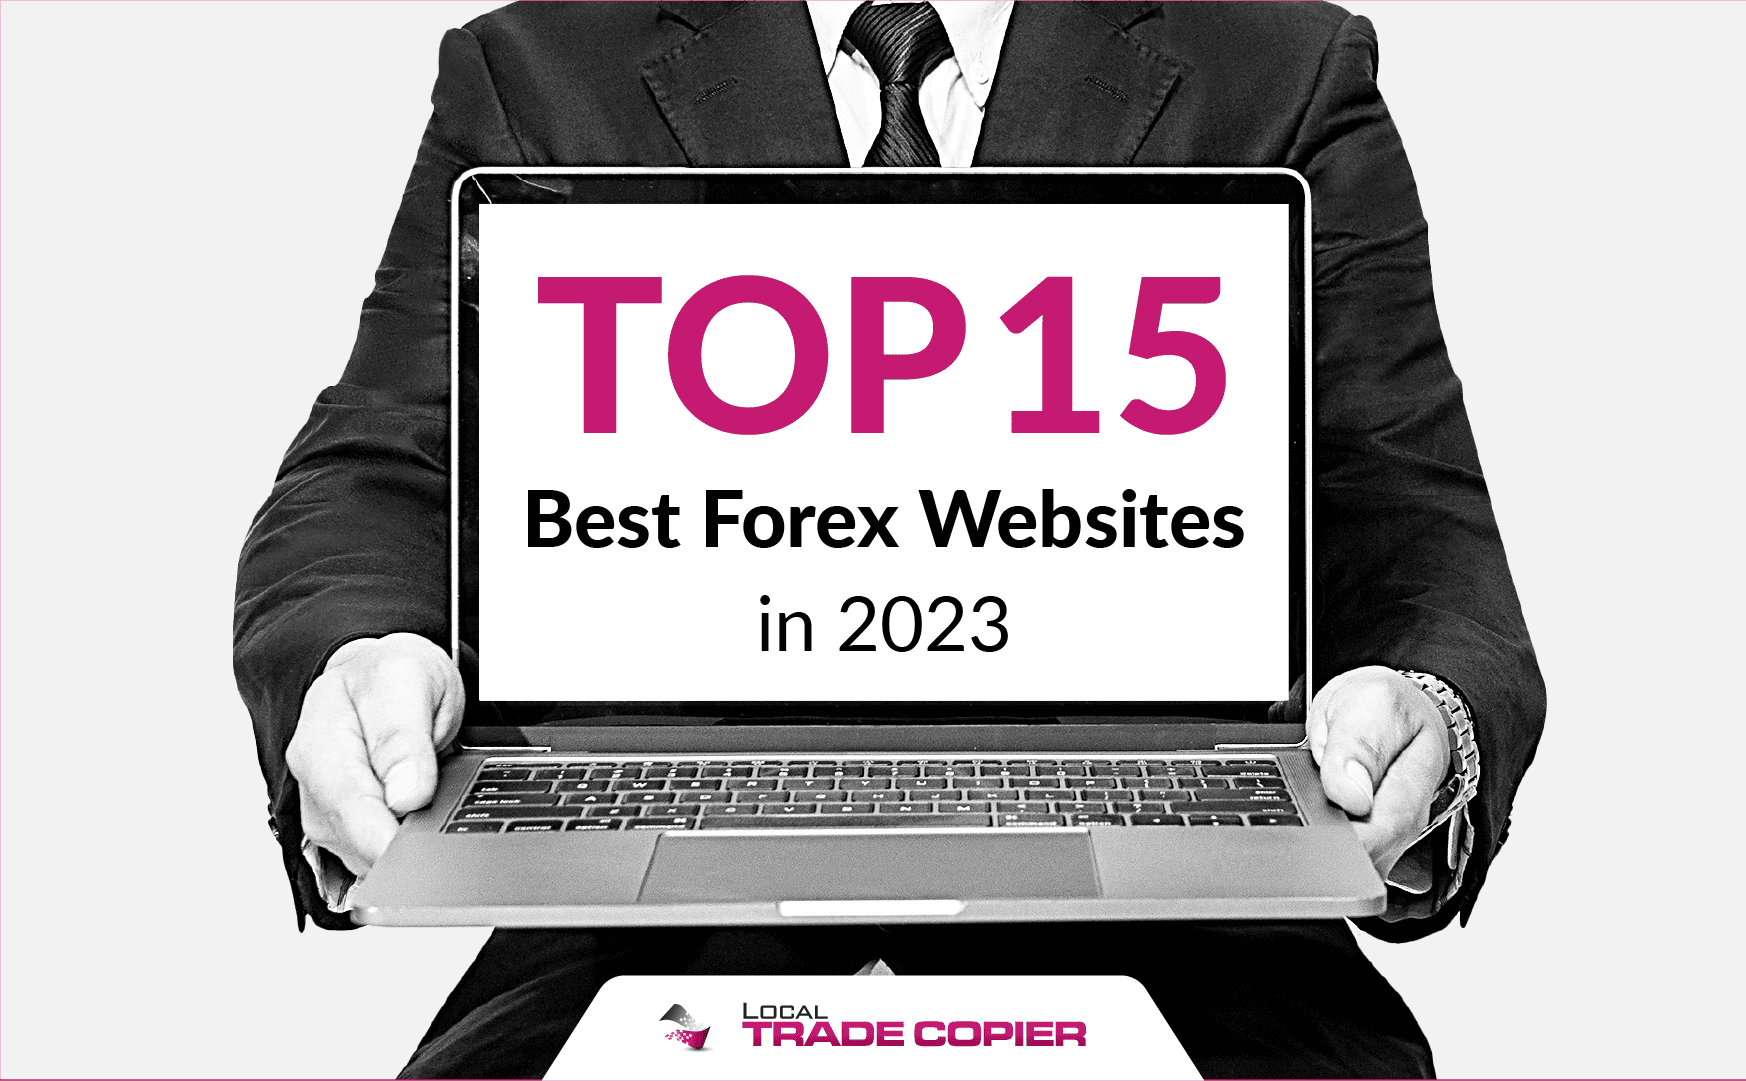 Top 15 Best Forex Websites in 2023: Your Ultimate Resource Guide